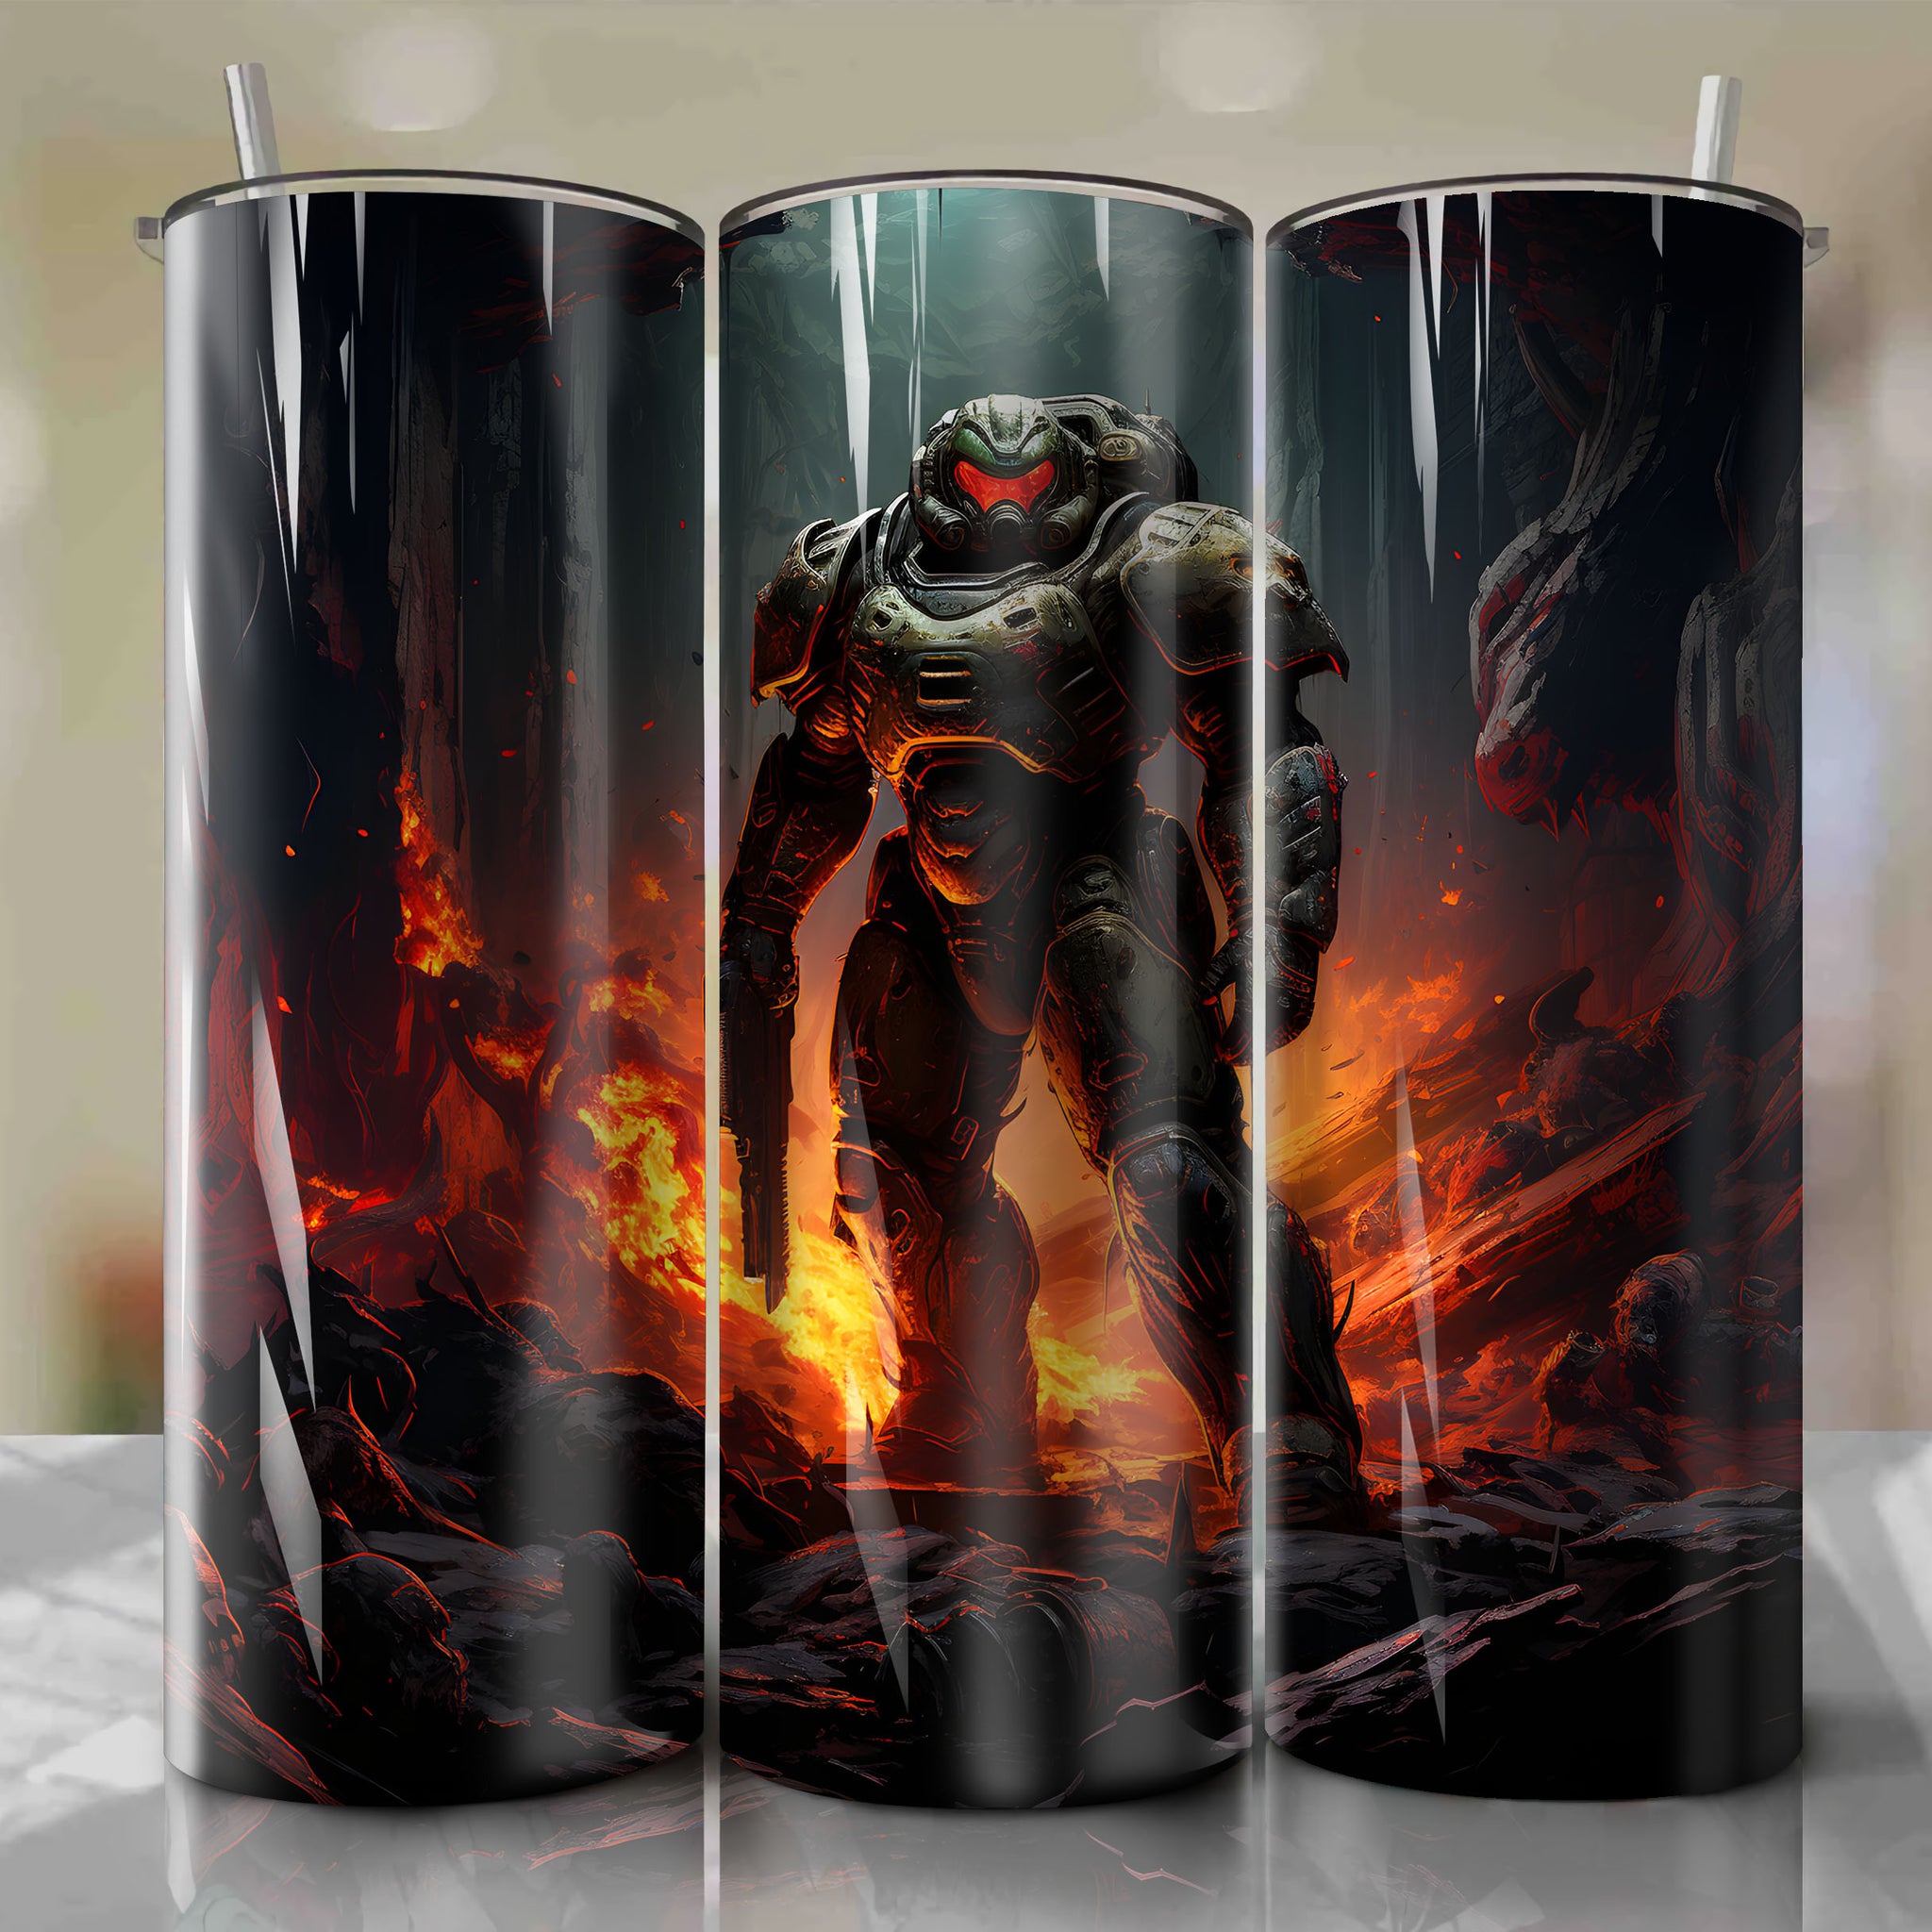 Vibrant and Artistic 20 Oz Tumbler Wrap - Perfect for Doom Slayer Fans
